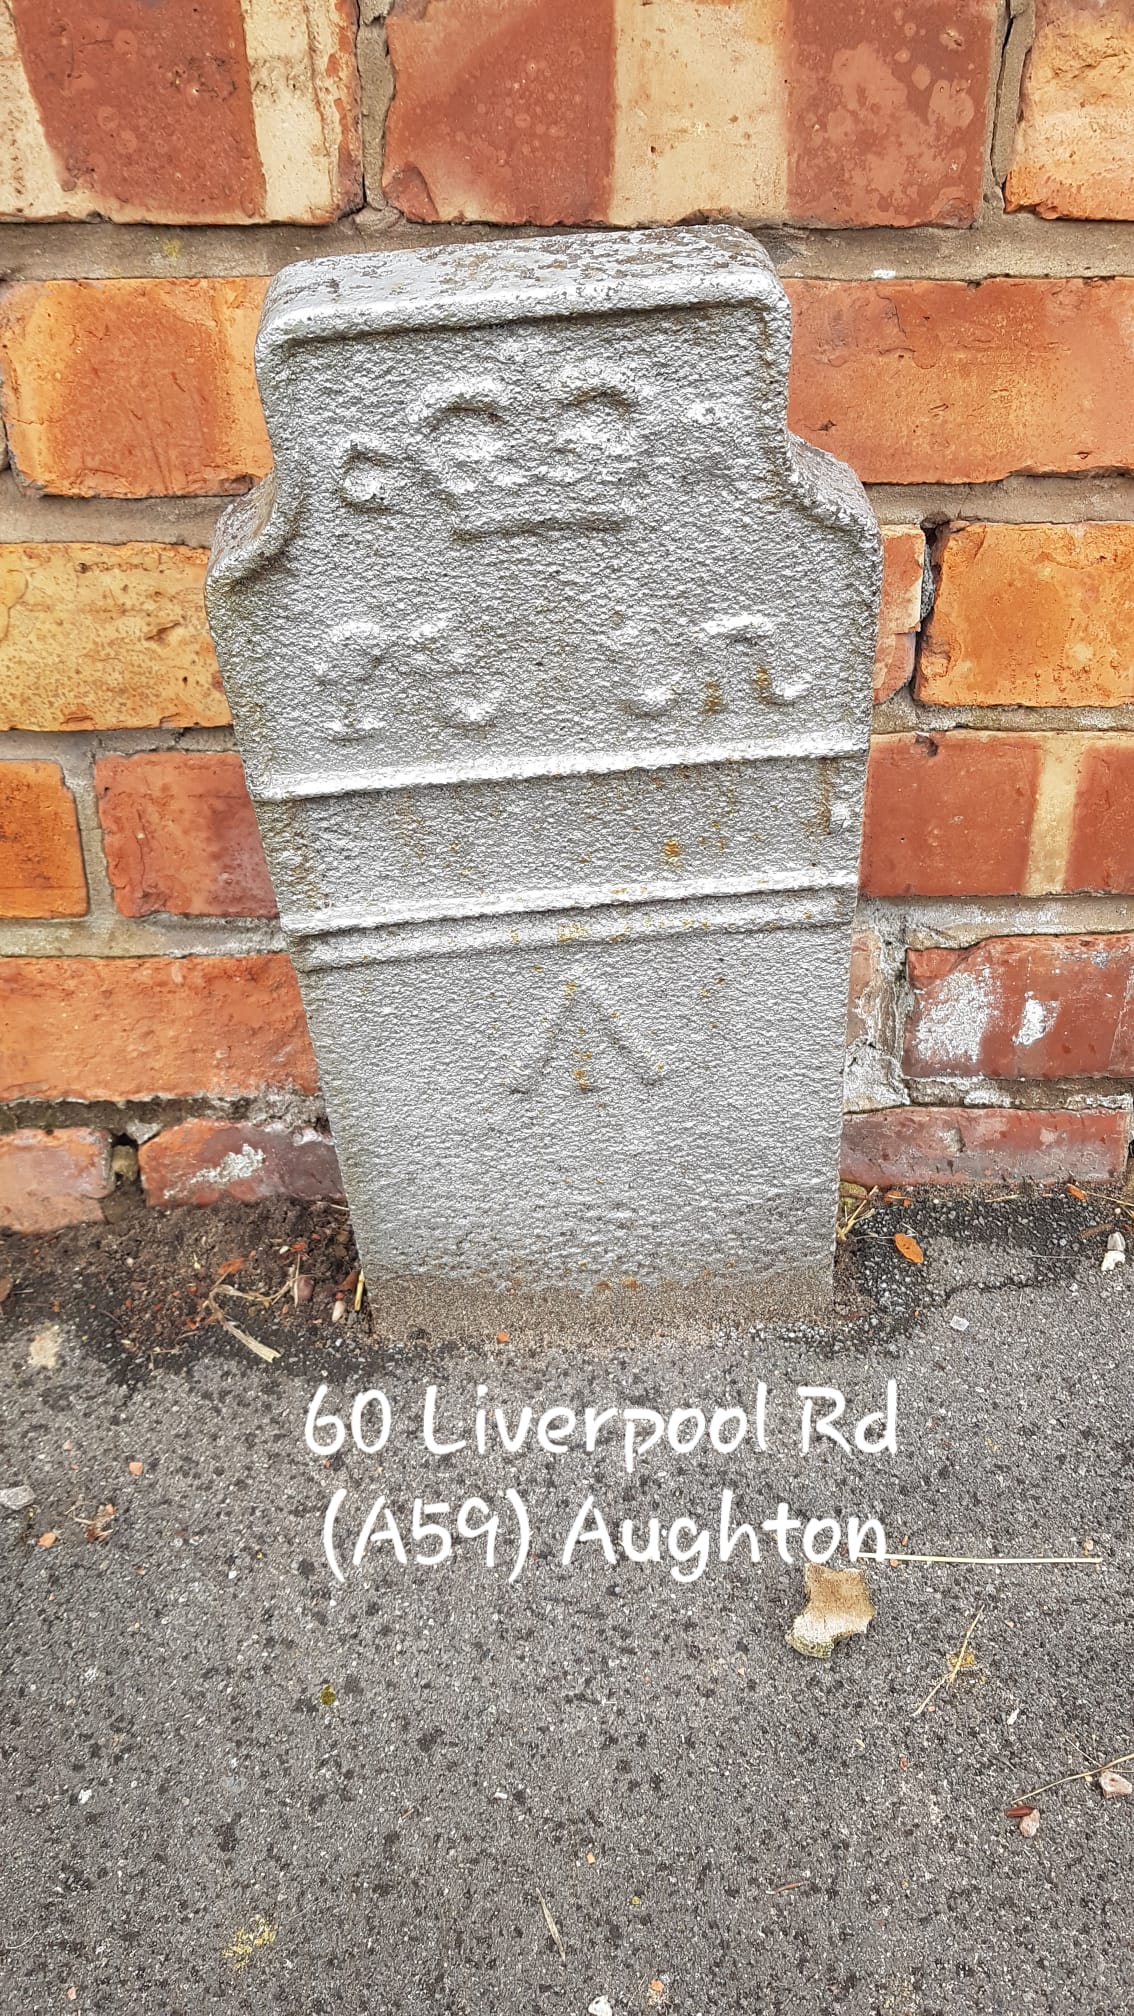 Telegraph cable marker post at 60 Liverpool Road, Aughton, Ormskirk by Jan Gibbons 